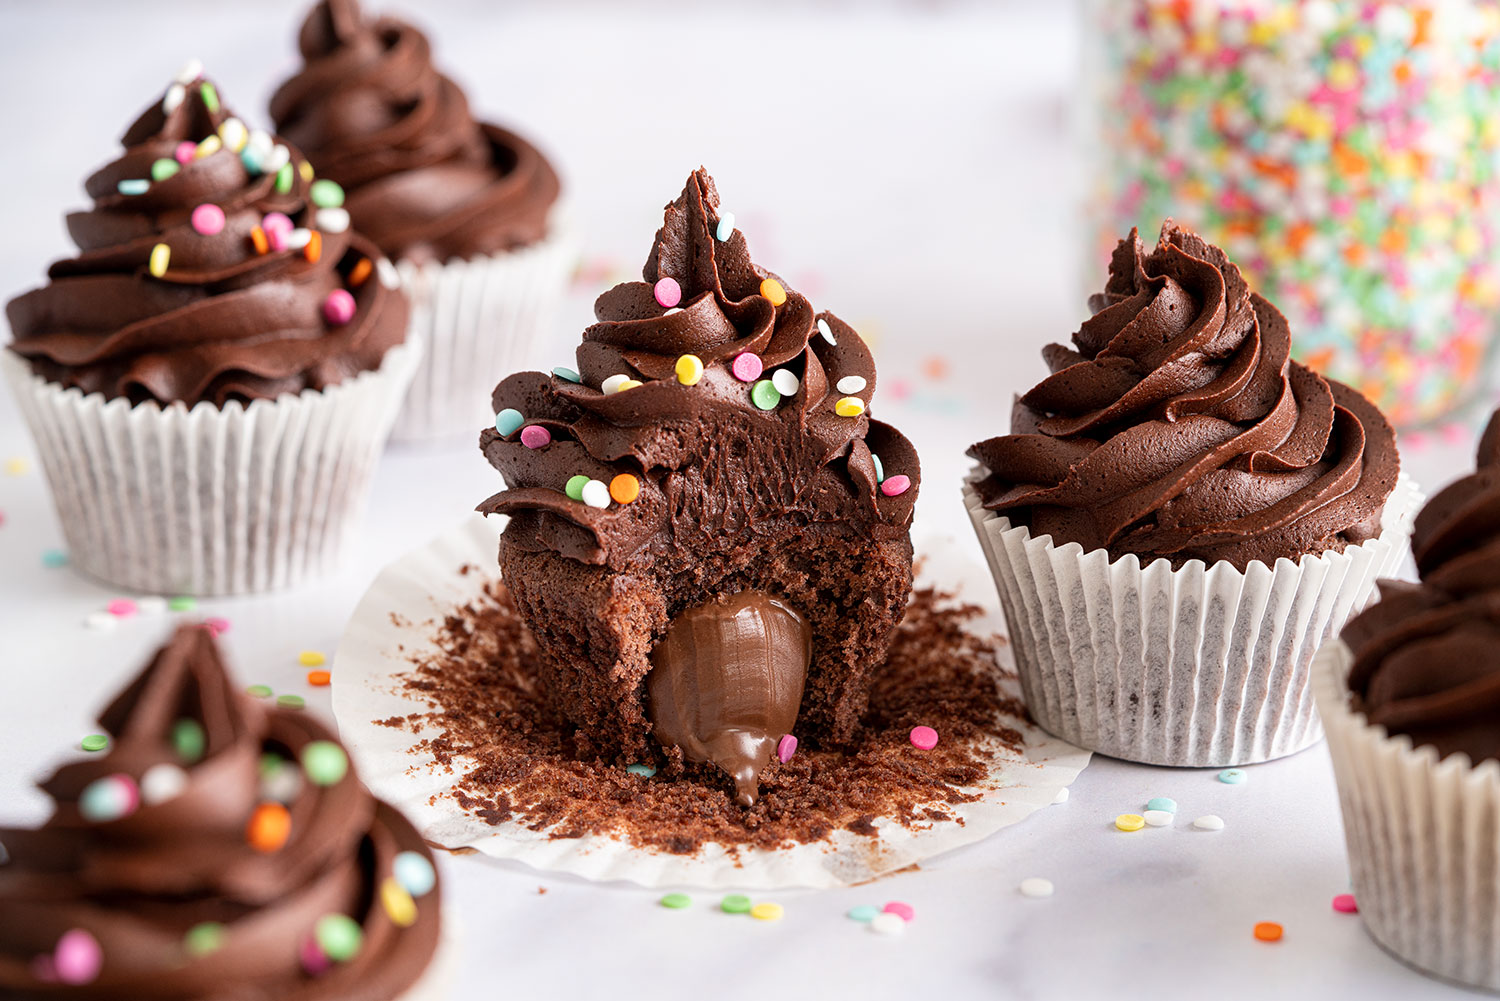 12 Chocolate Cupcakes | Created by Diane